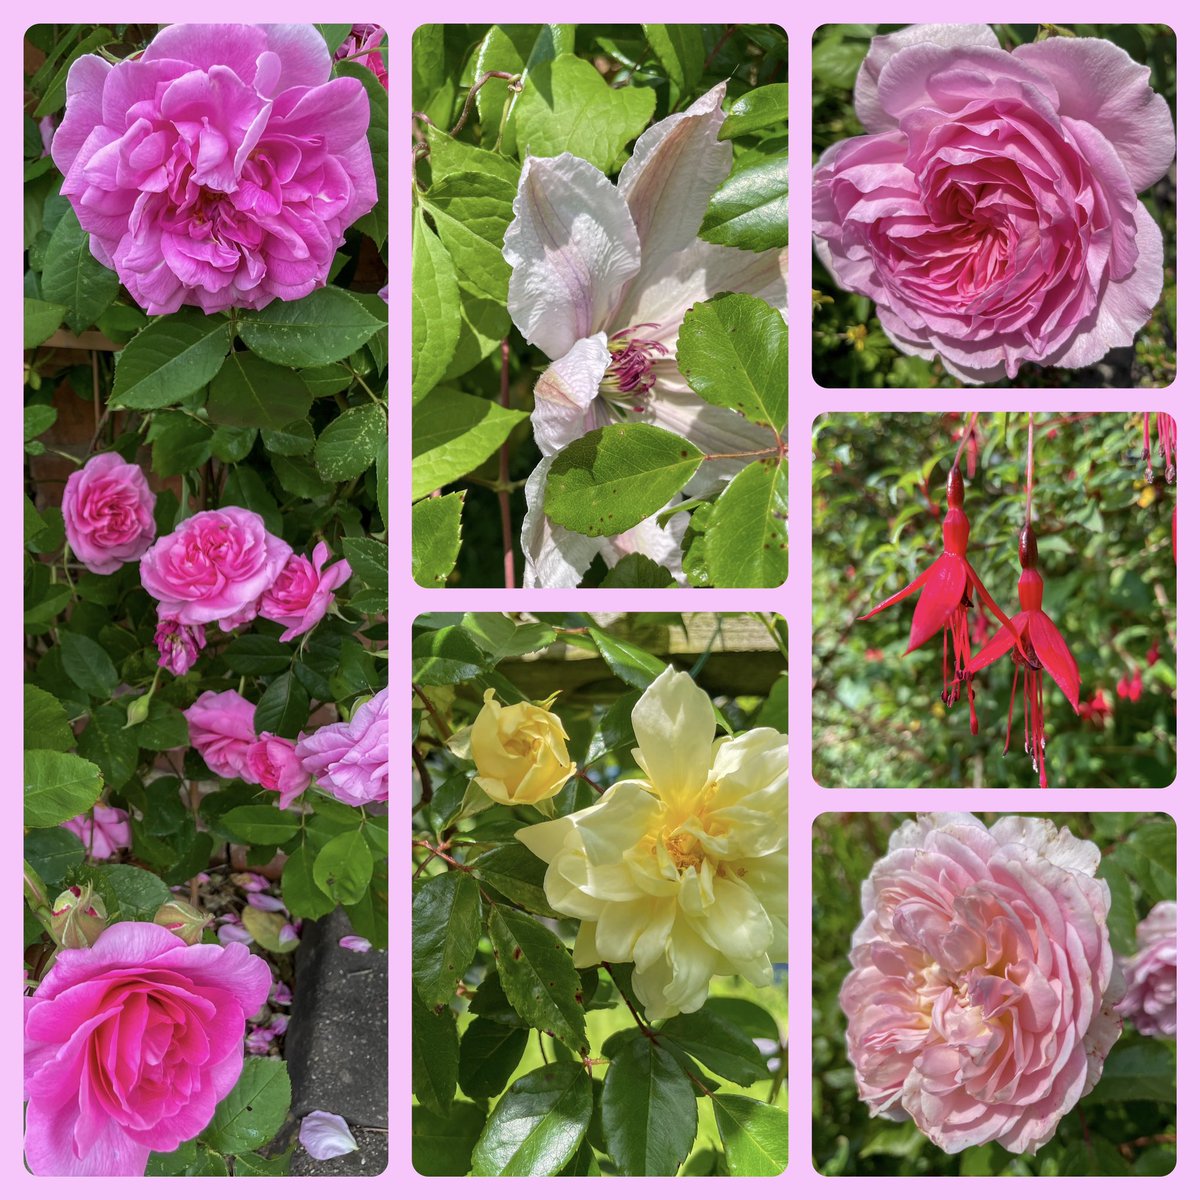 It’s coming up roses and summer colours in this week’s #SixOnSaturday